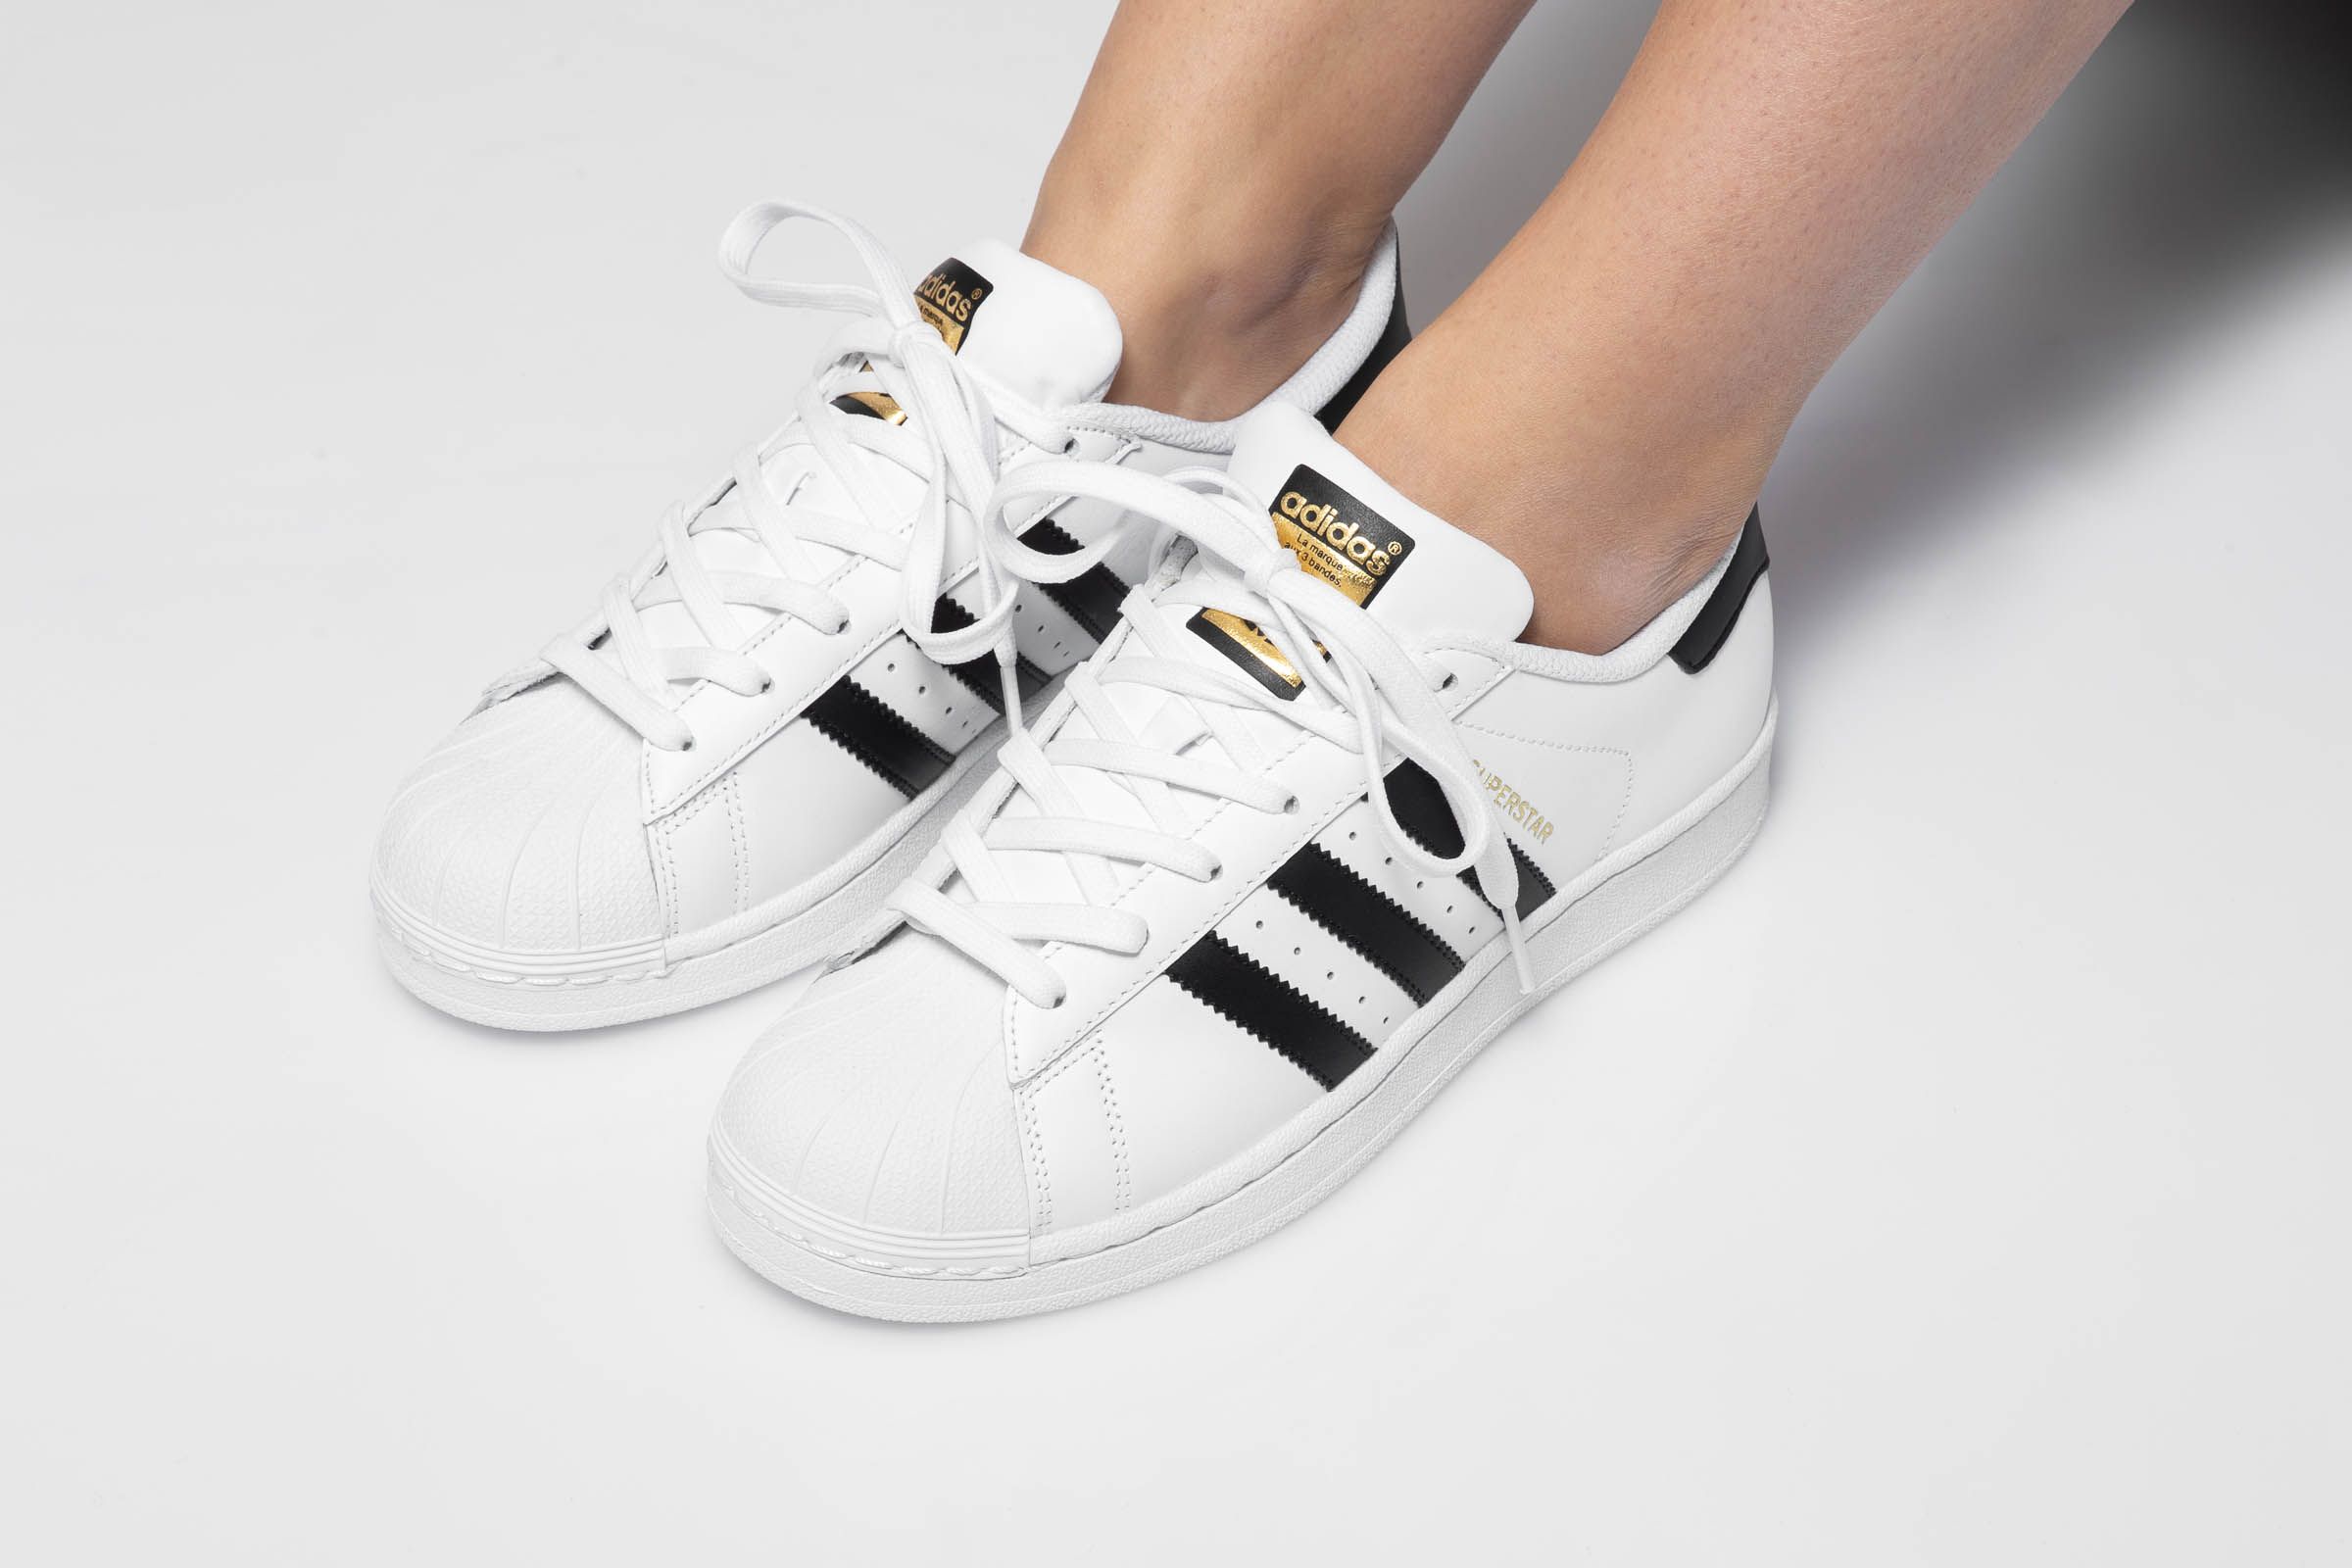 Titolo on Twitter: "the all-time classic Adidas Superstar is back in stock.  Available in mens and wins sizes online. here ➡️ https://t.co/bFWL38xJ3U UK  3.5 (36) - UK 11 (46) style code 🔎